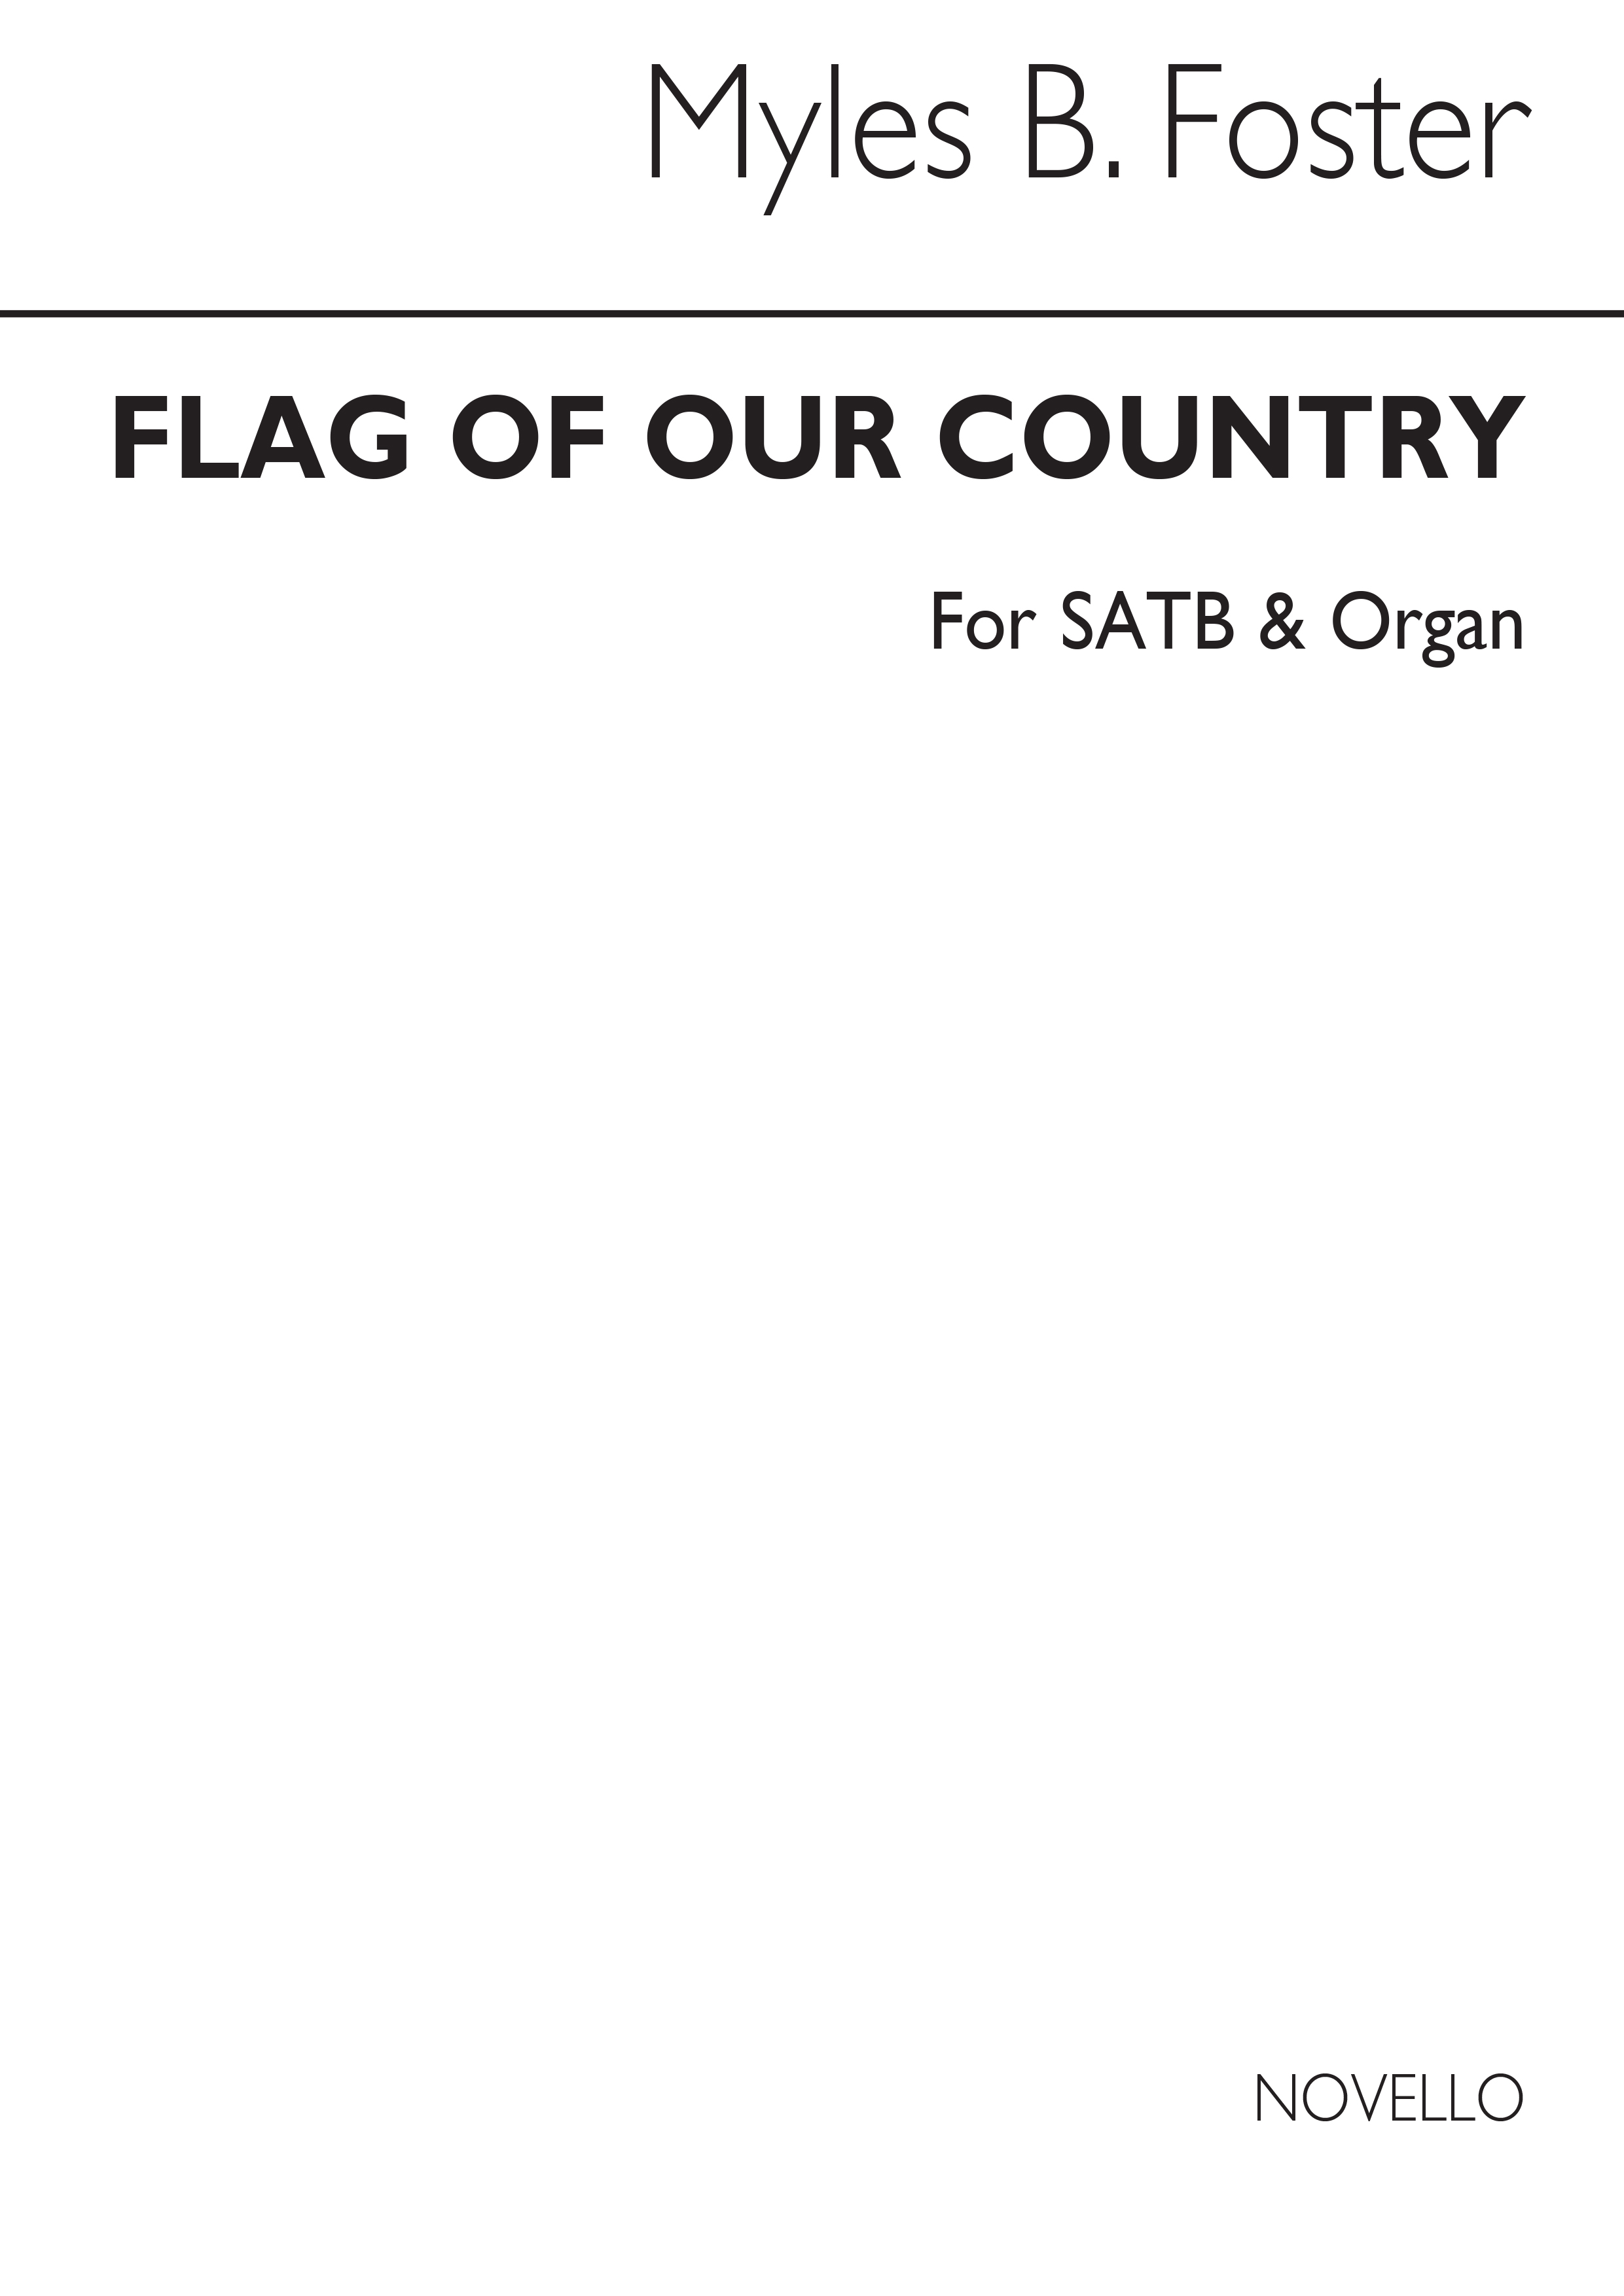 Myles B. Foster: Flag Of Our Country (Hymn) Satb/Organ